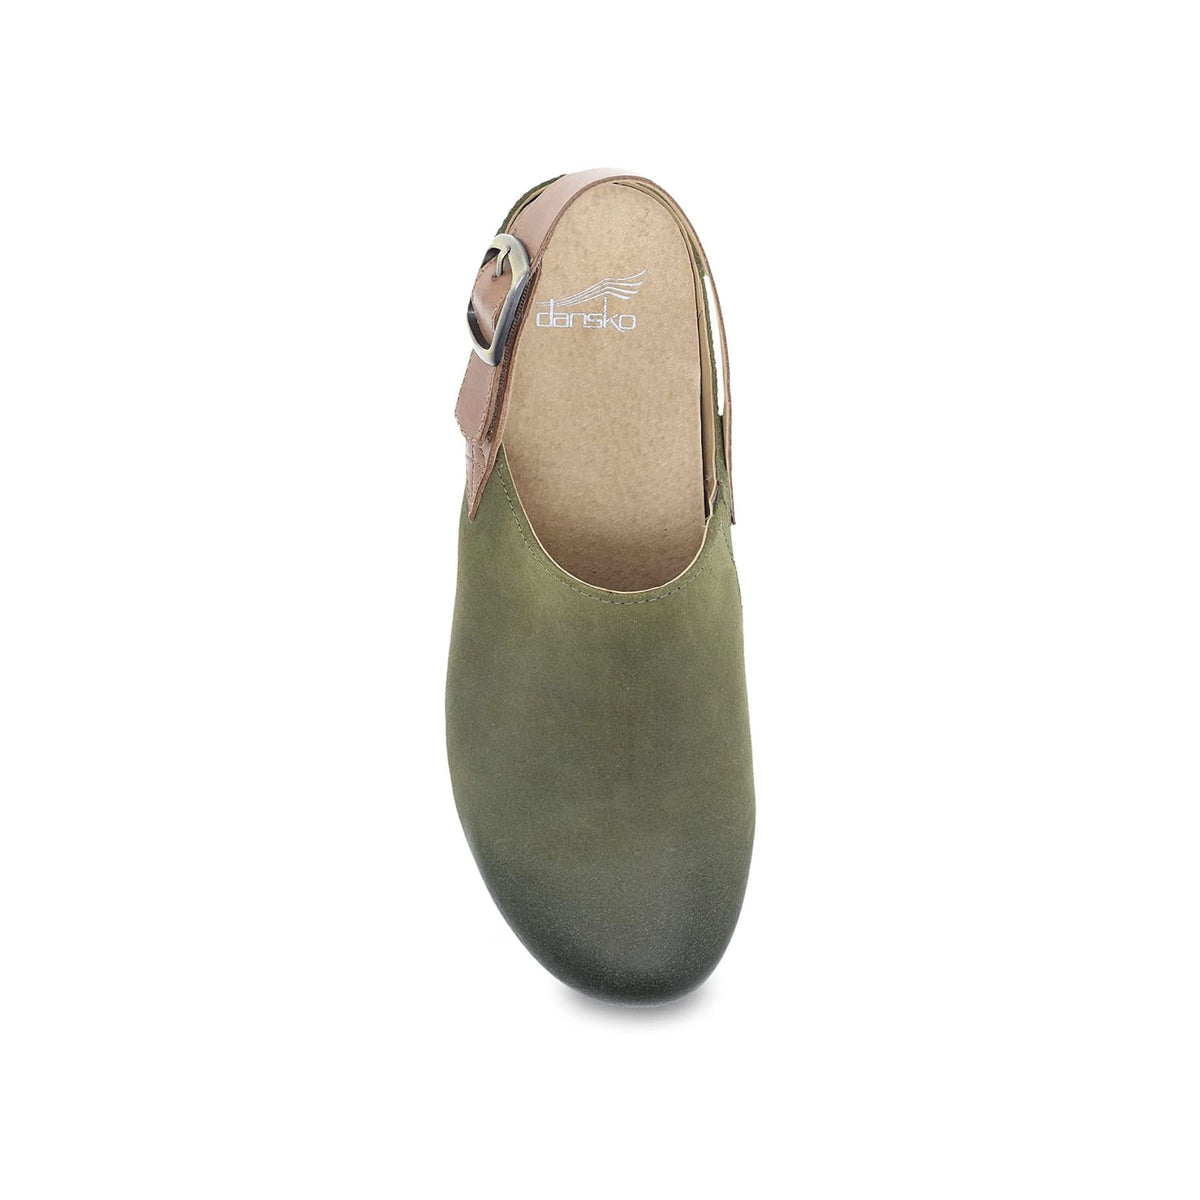 Dansko olive green suede clog with hook-and-loop ankle strap and rounded toe, viewed from above on a white background.